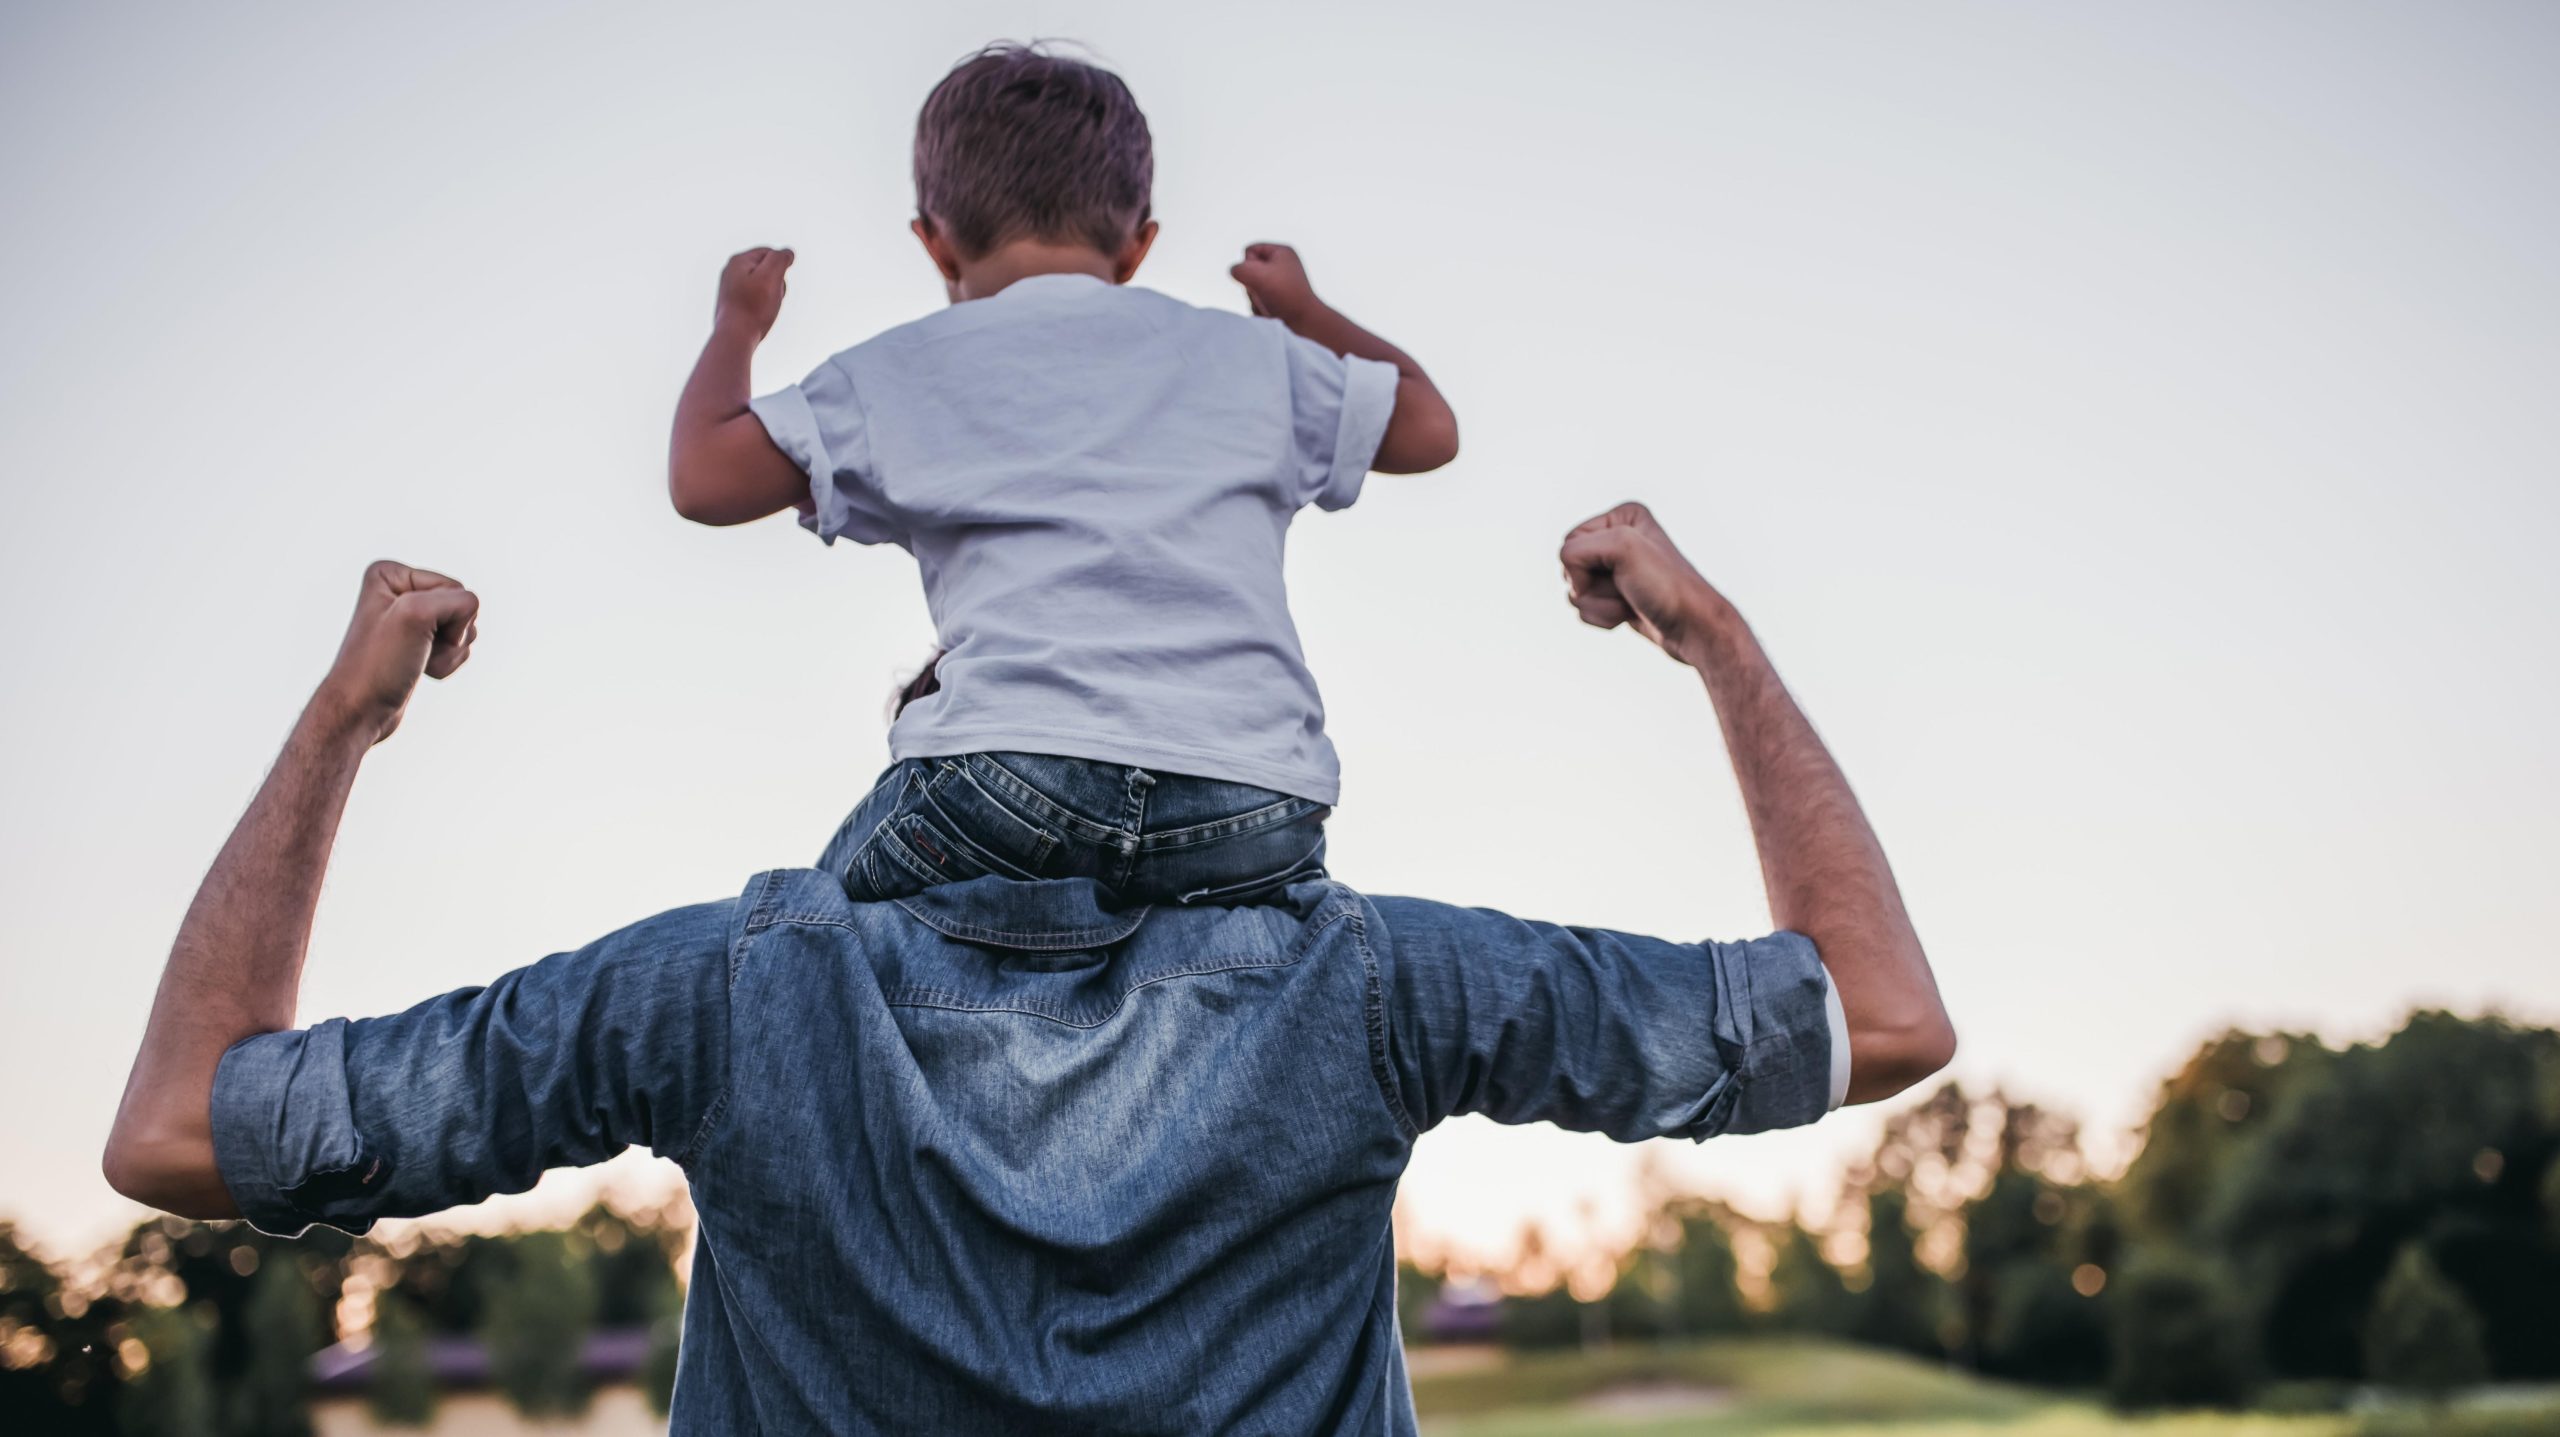 How to Parent With Both Strength and Flexibility